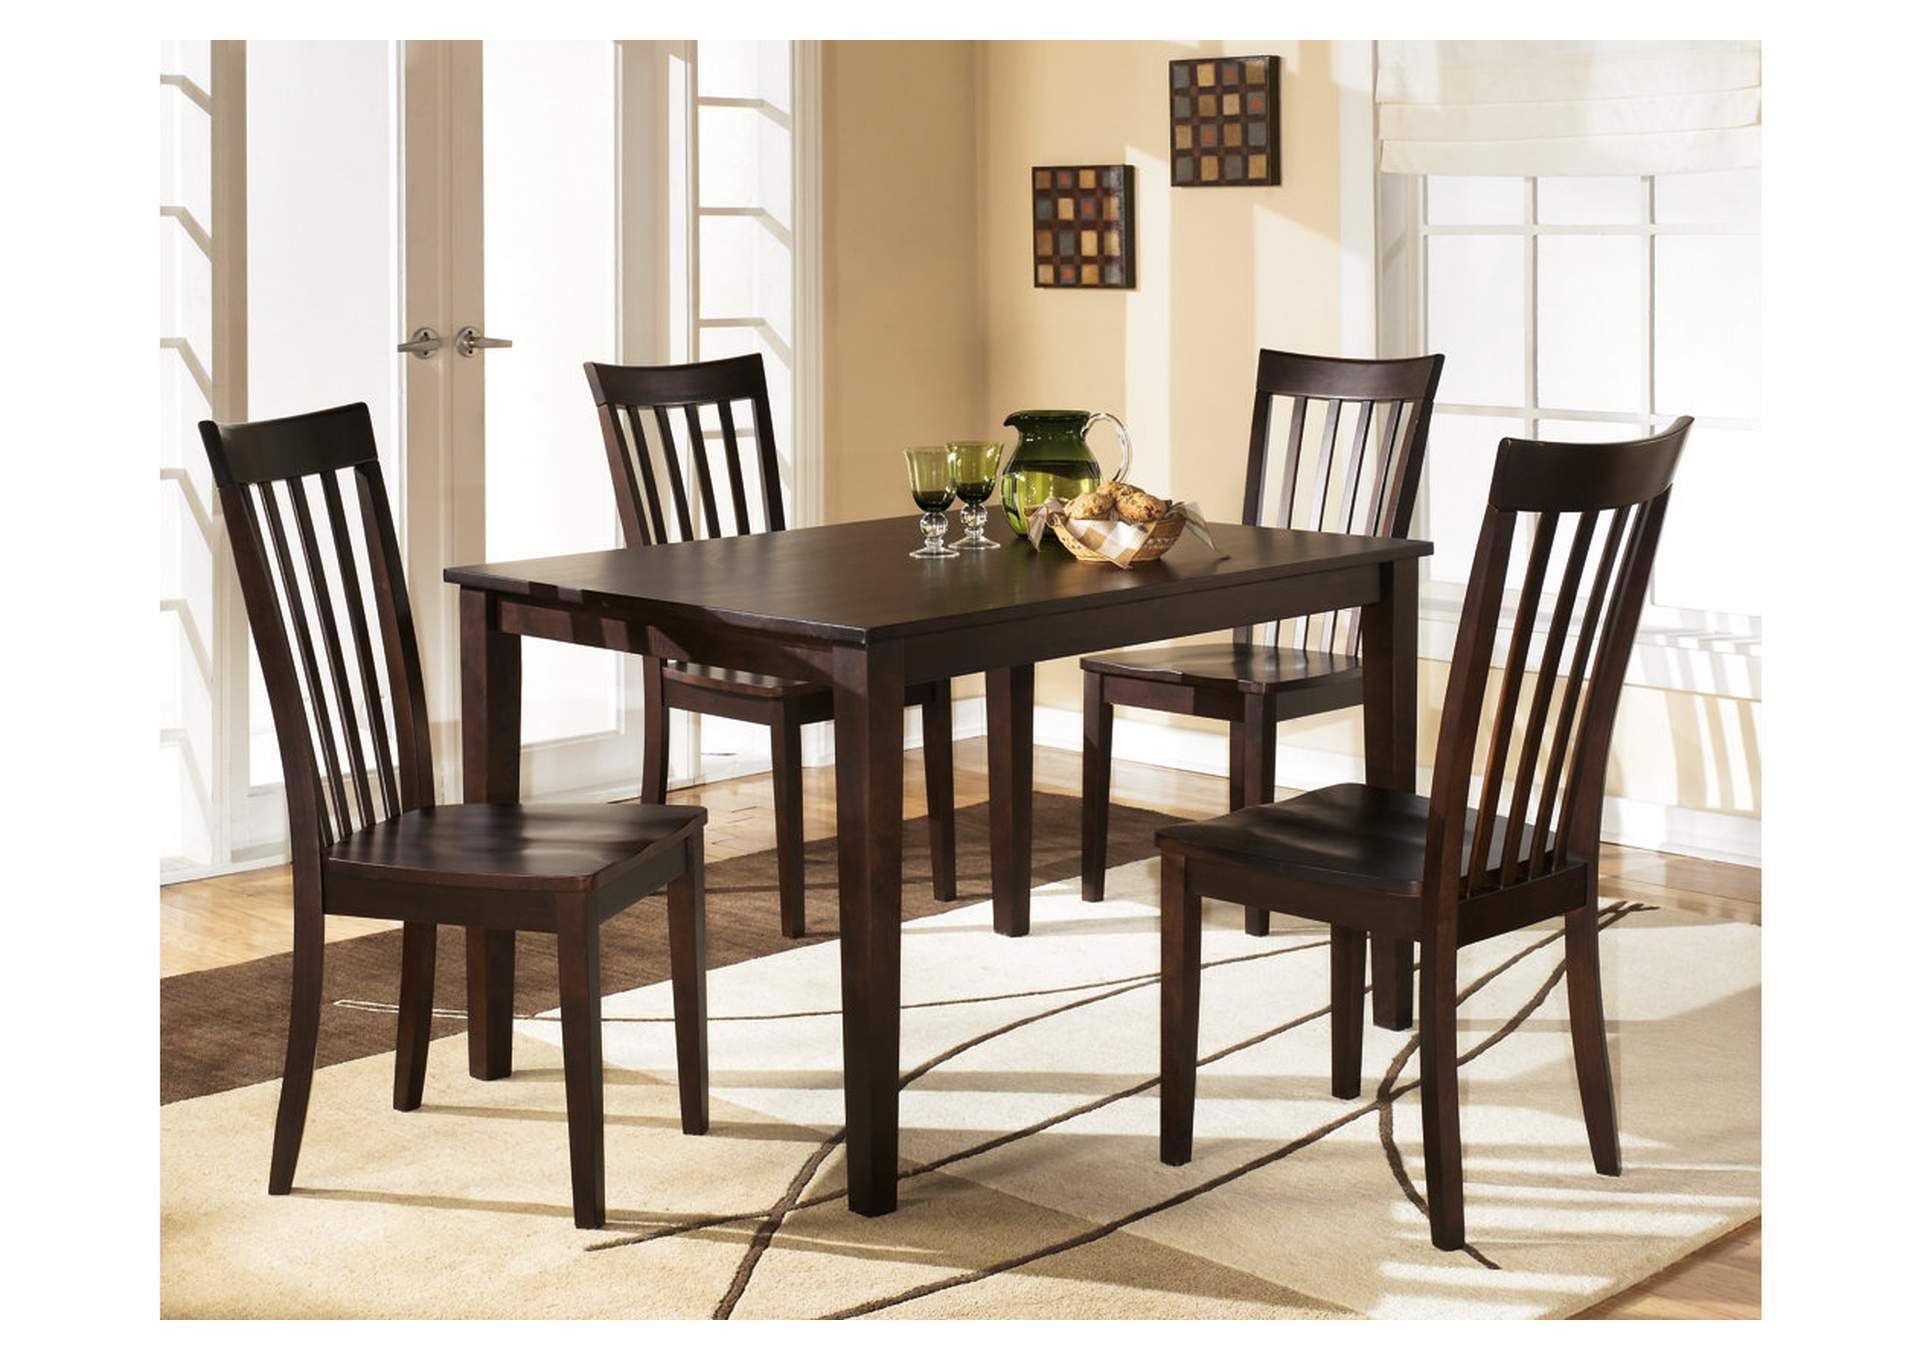 Discount Furniture Outlet Hyland Rectangular Dining Table W 4 Chairs